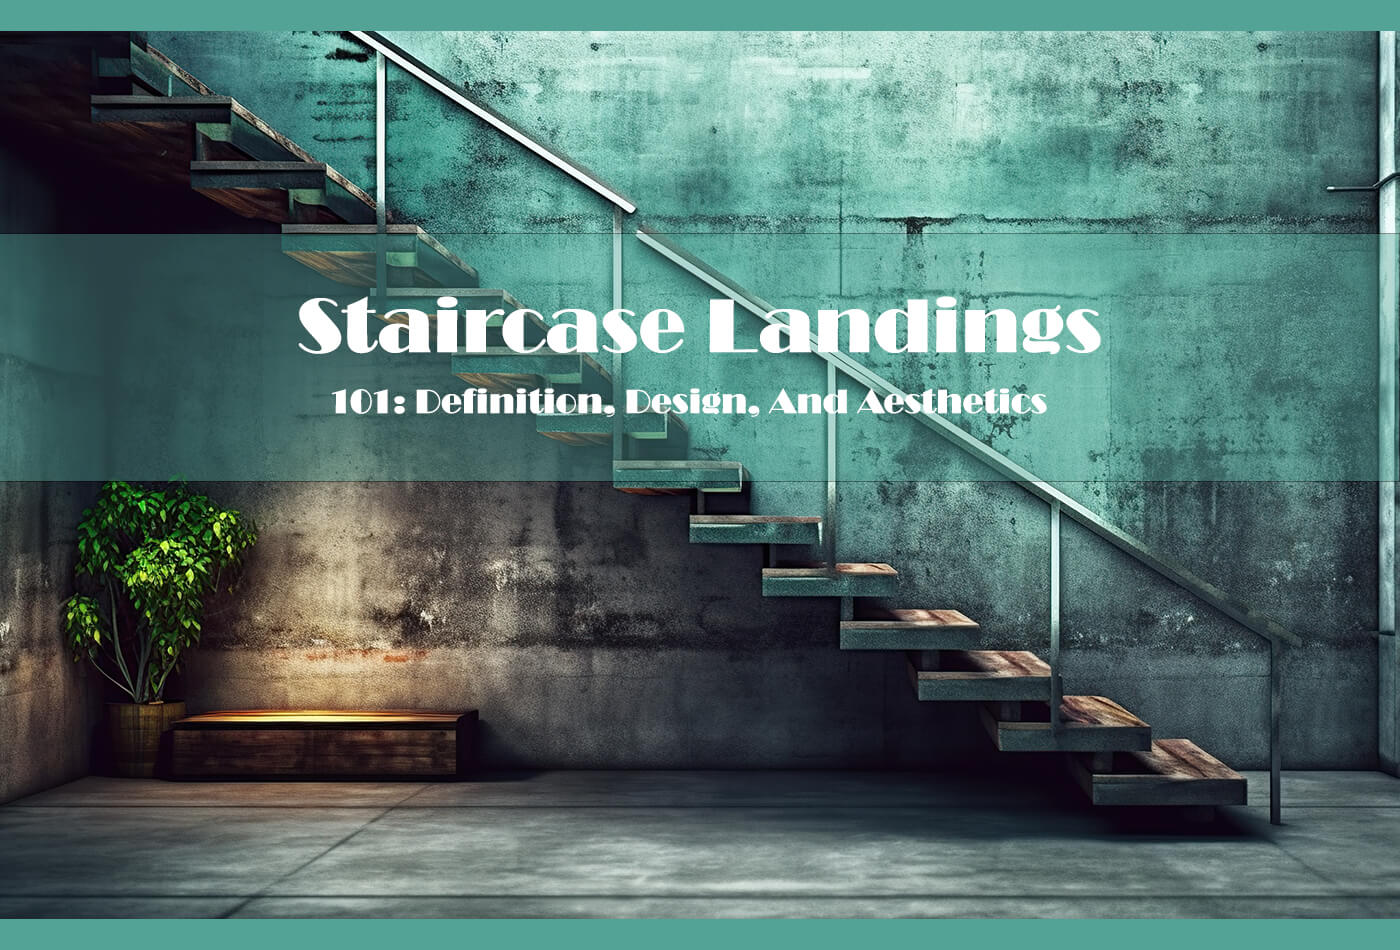 Staircase Landings 101: Definition, Design, And Aesthetics